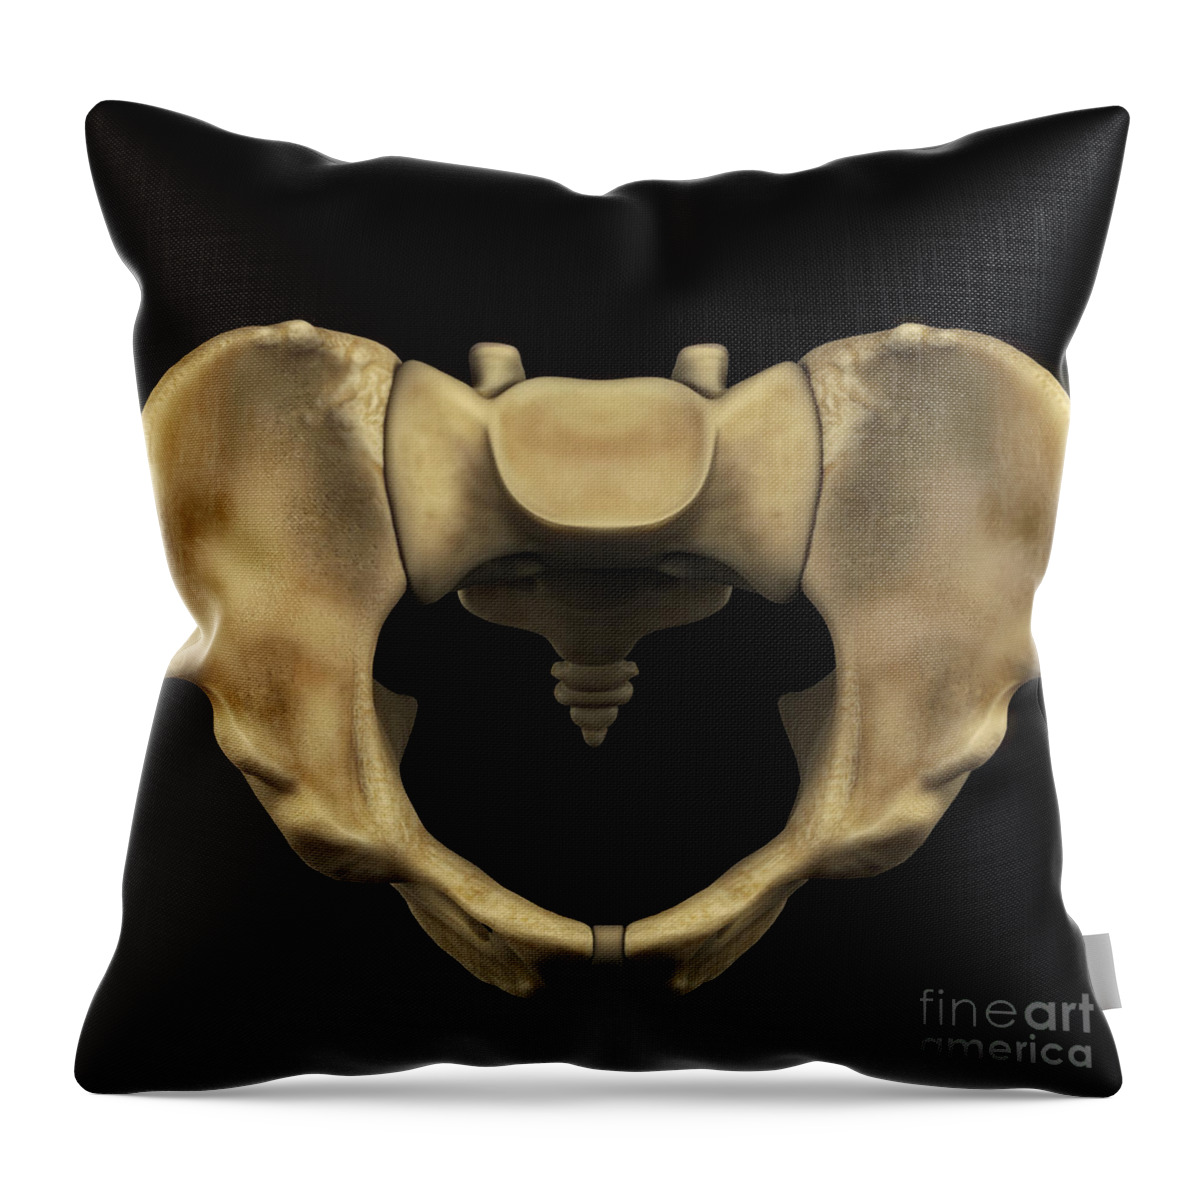 Pelvic floor of human male. Throw Pillow for Sale by